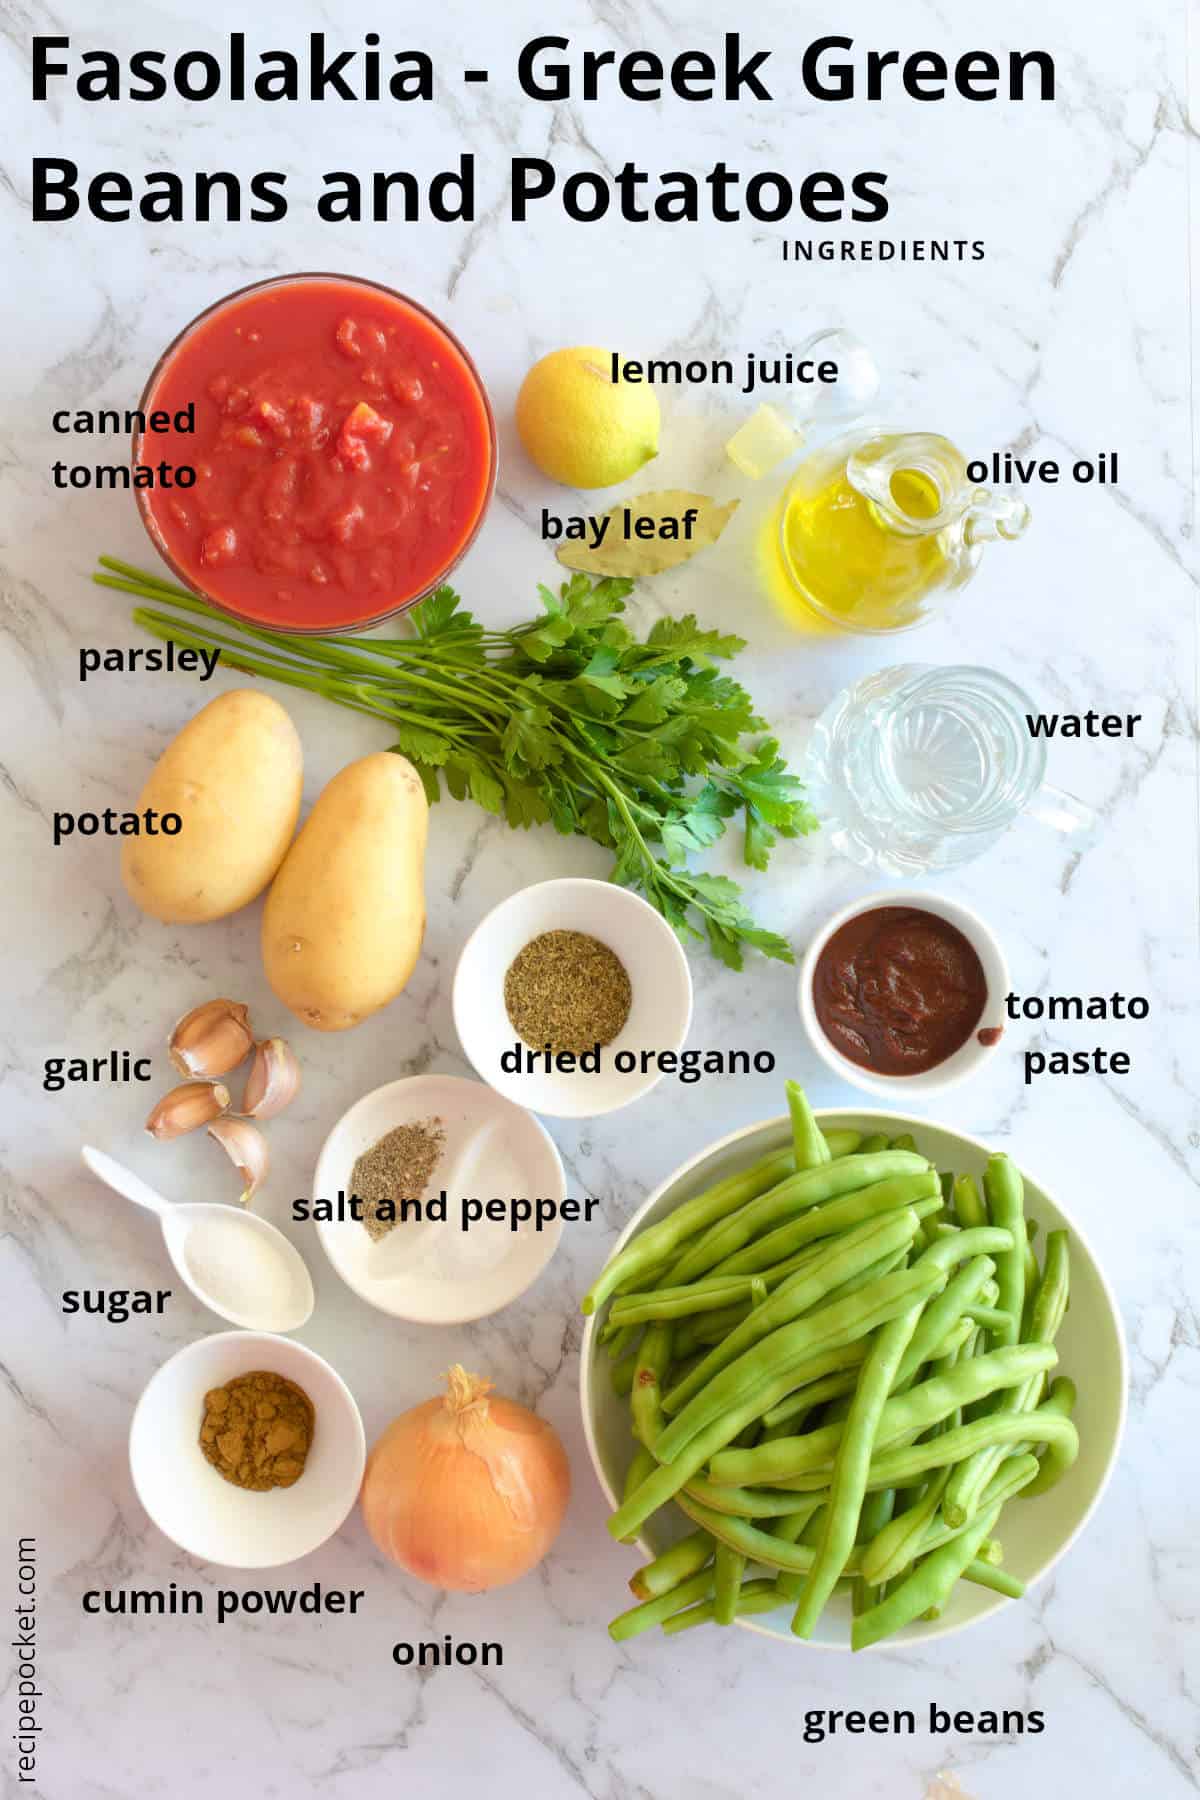 Image of the ingredients needed to make Fasolakia.